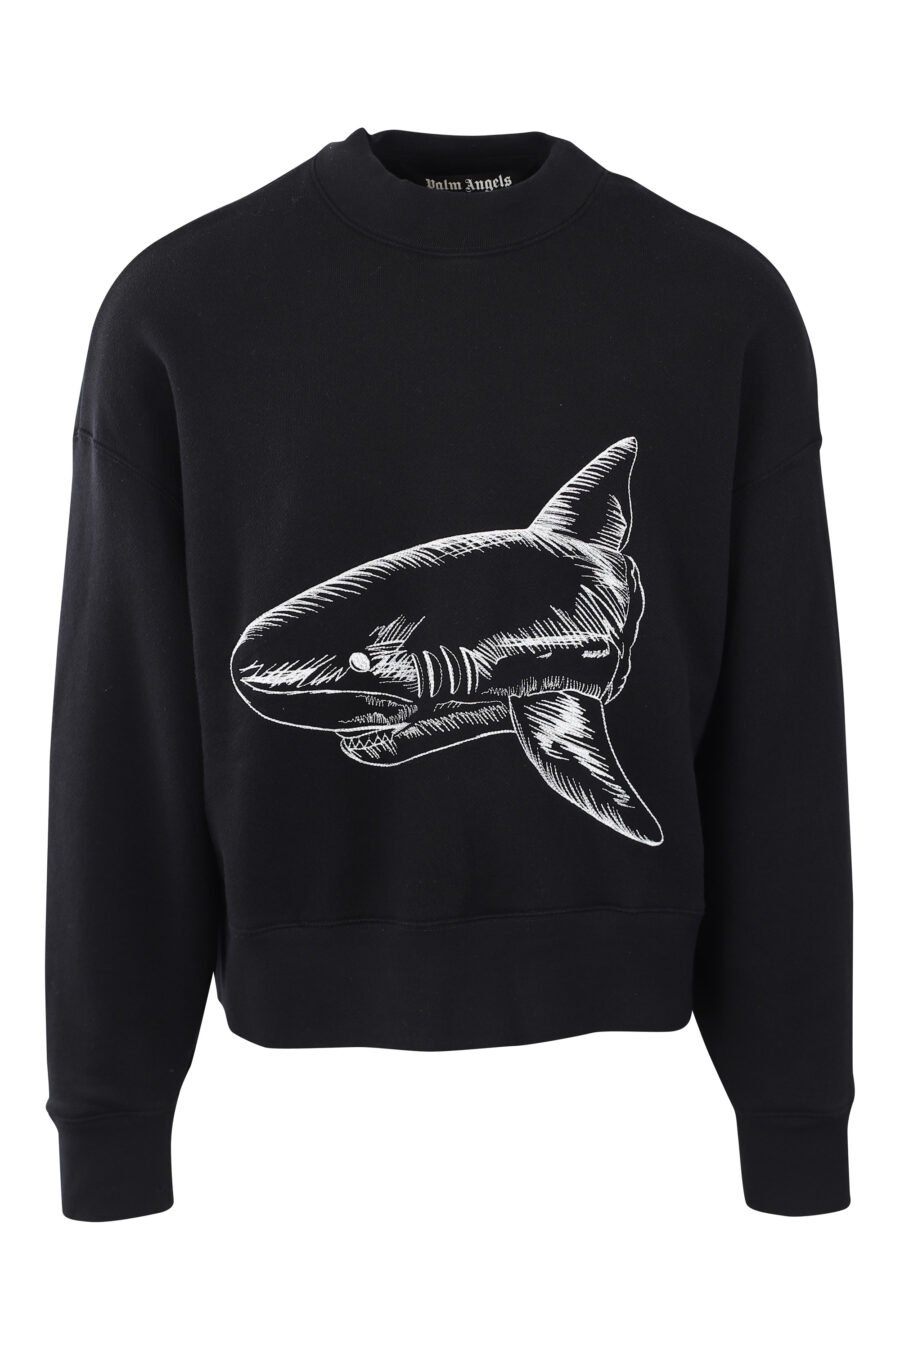 Black sweatshirt with white embroidered shark and logo on the back - IMG 2565